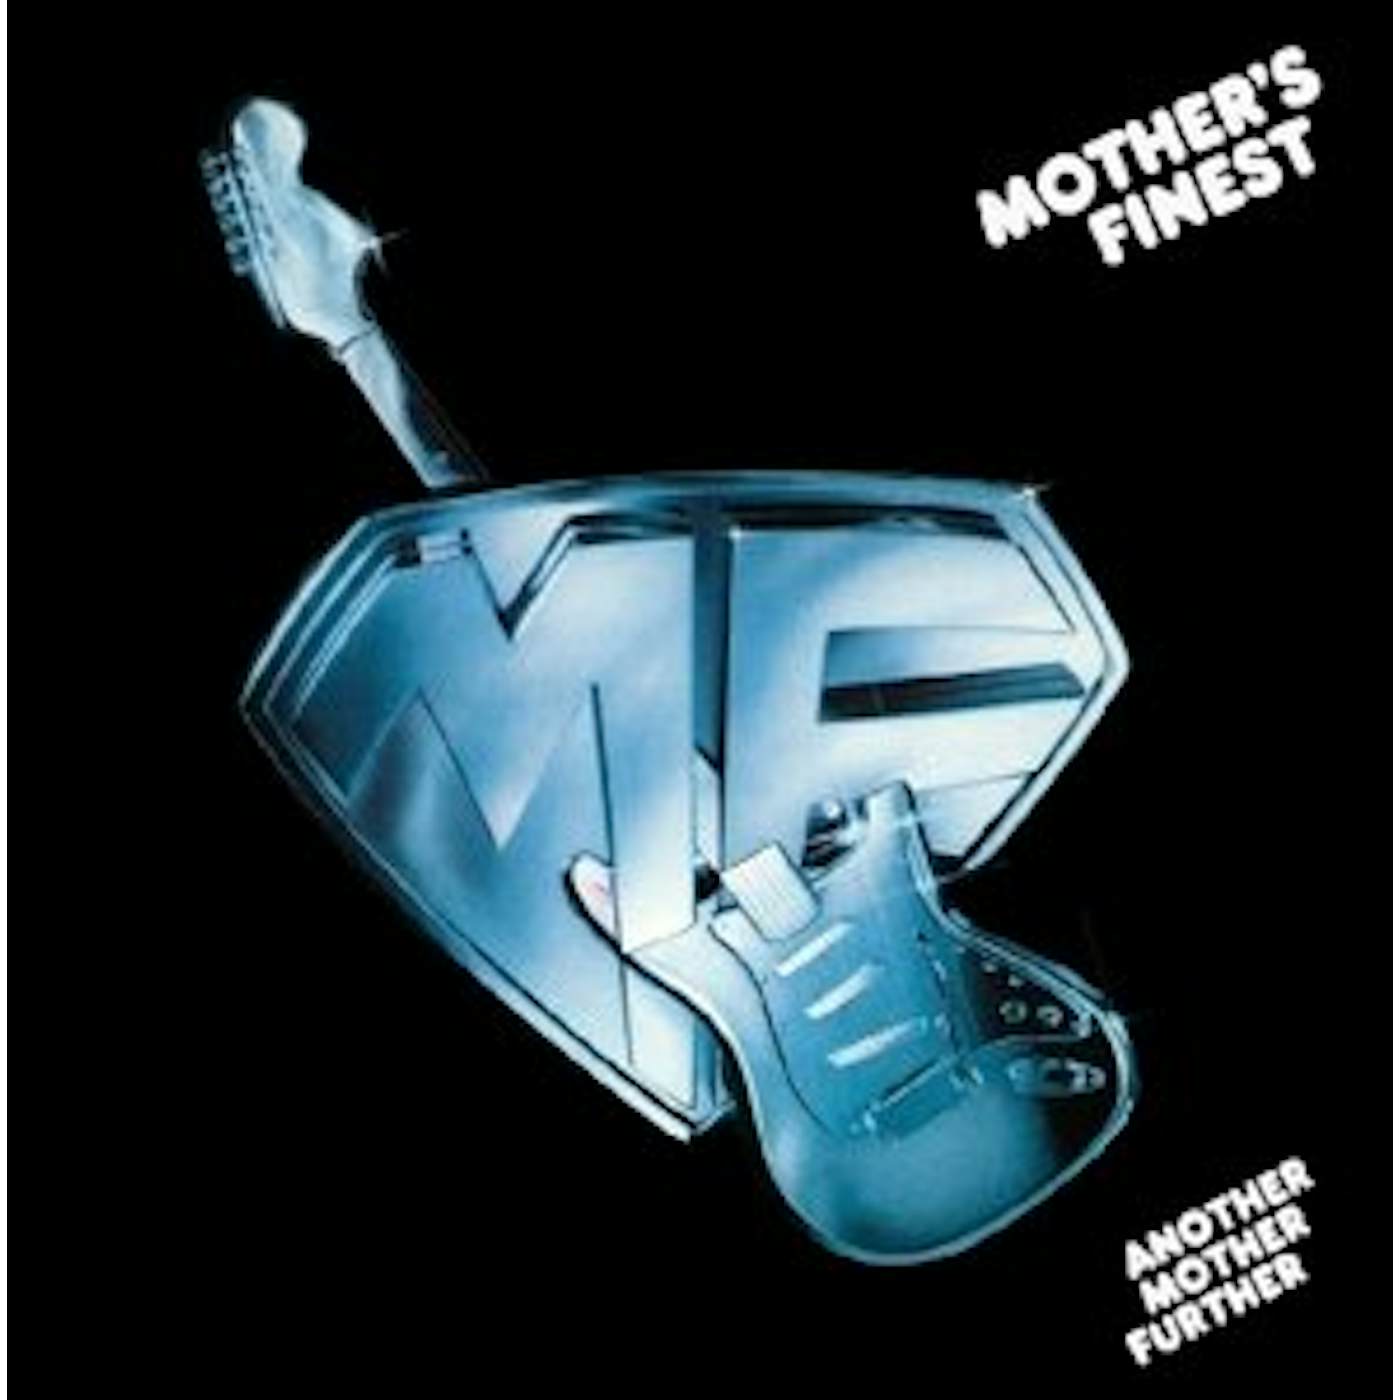 Mother's Finest ANOTHER MOTHER FURTHER CD